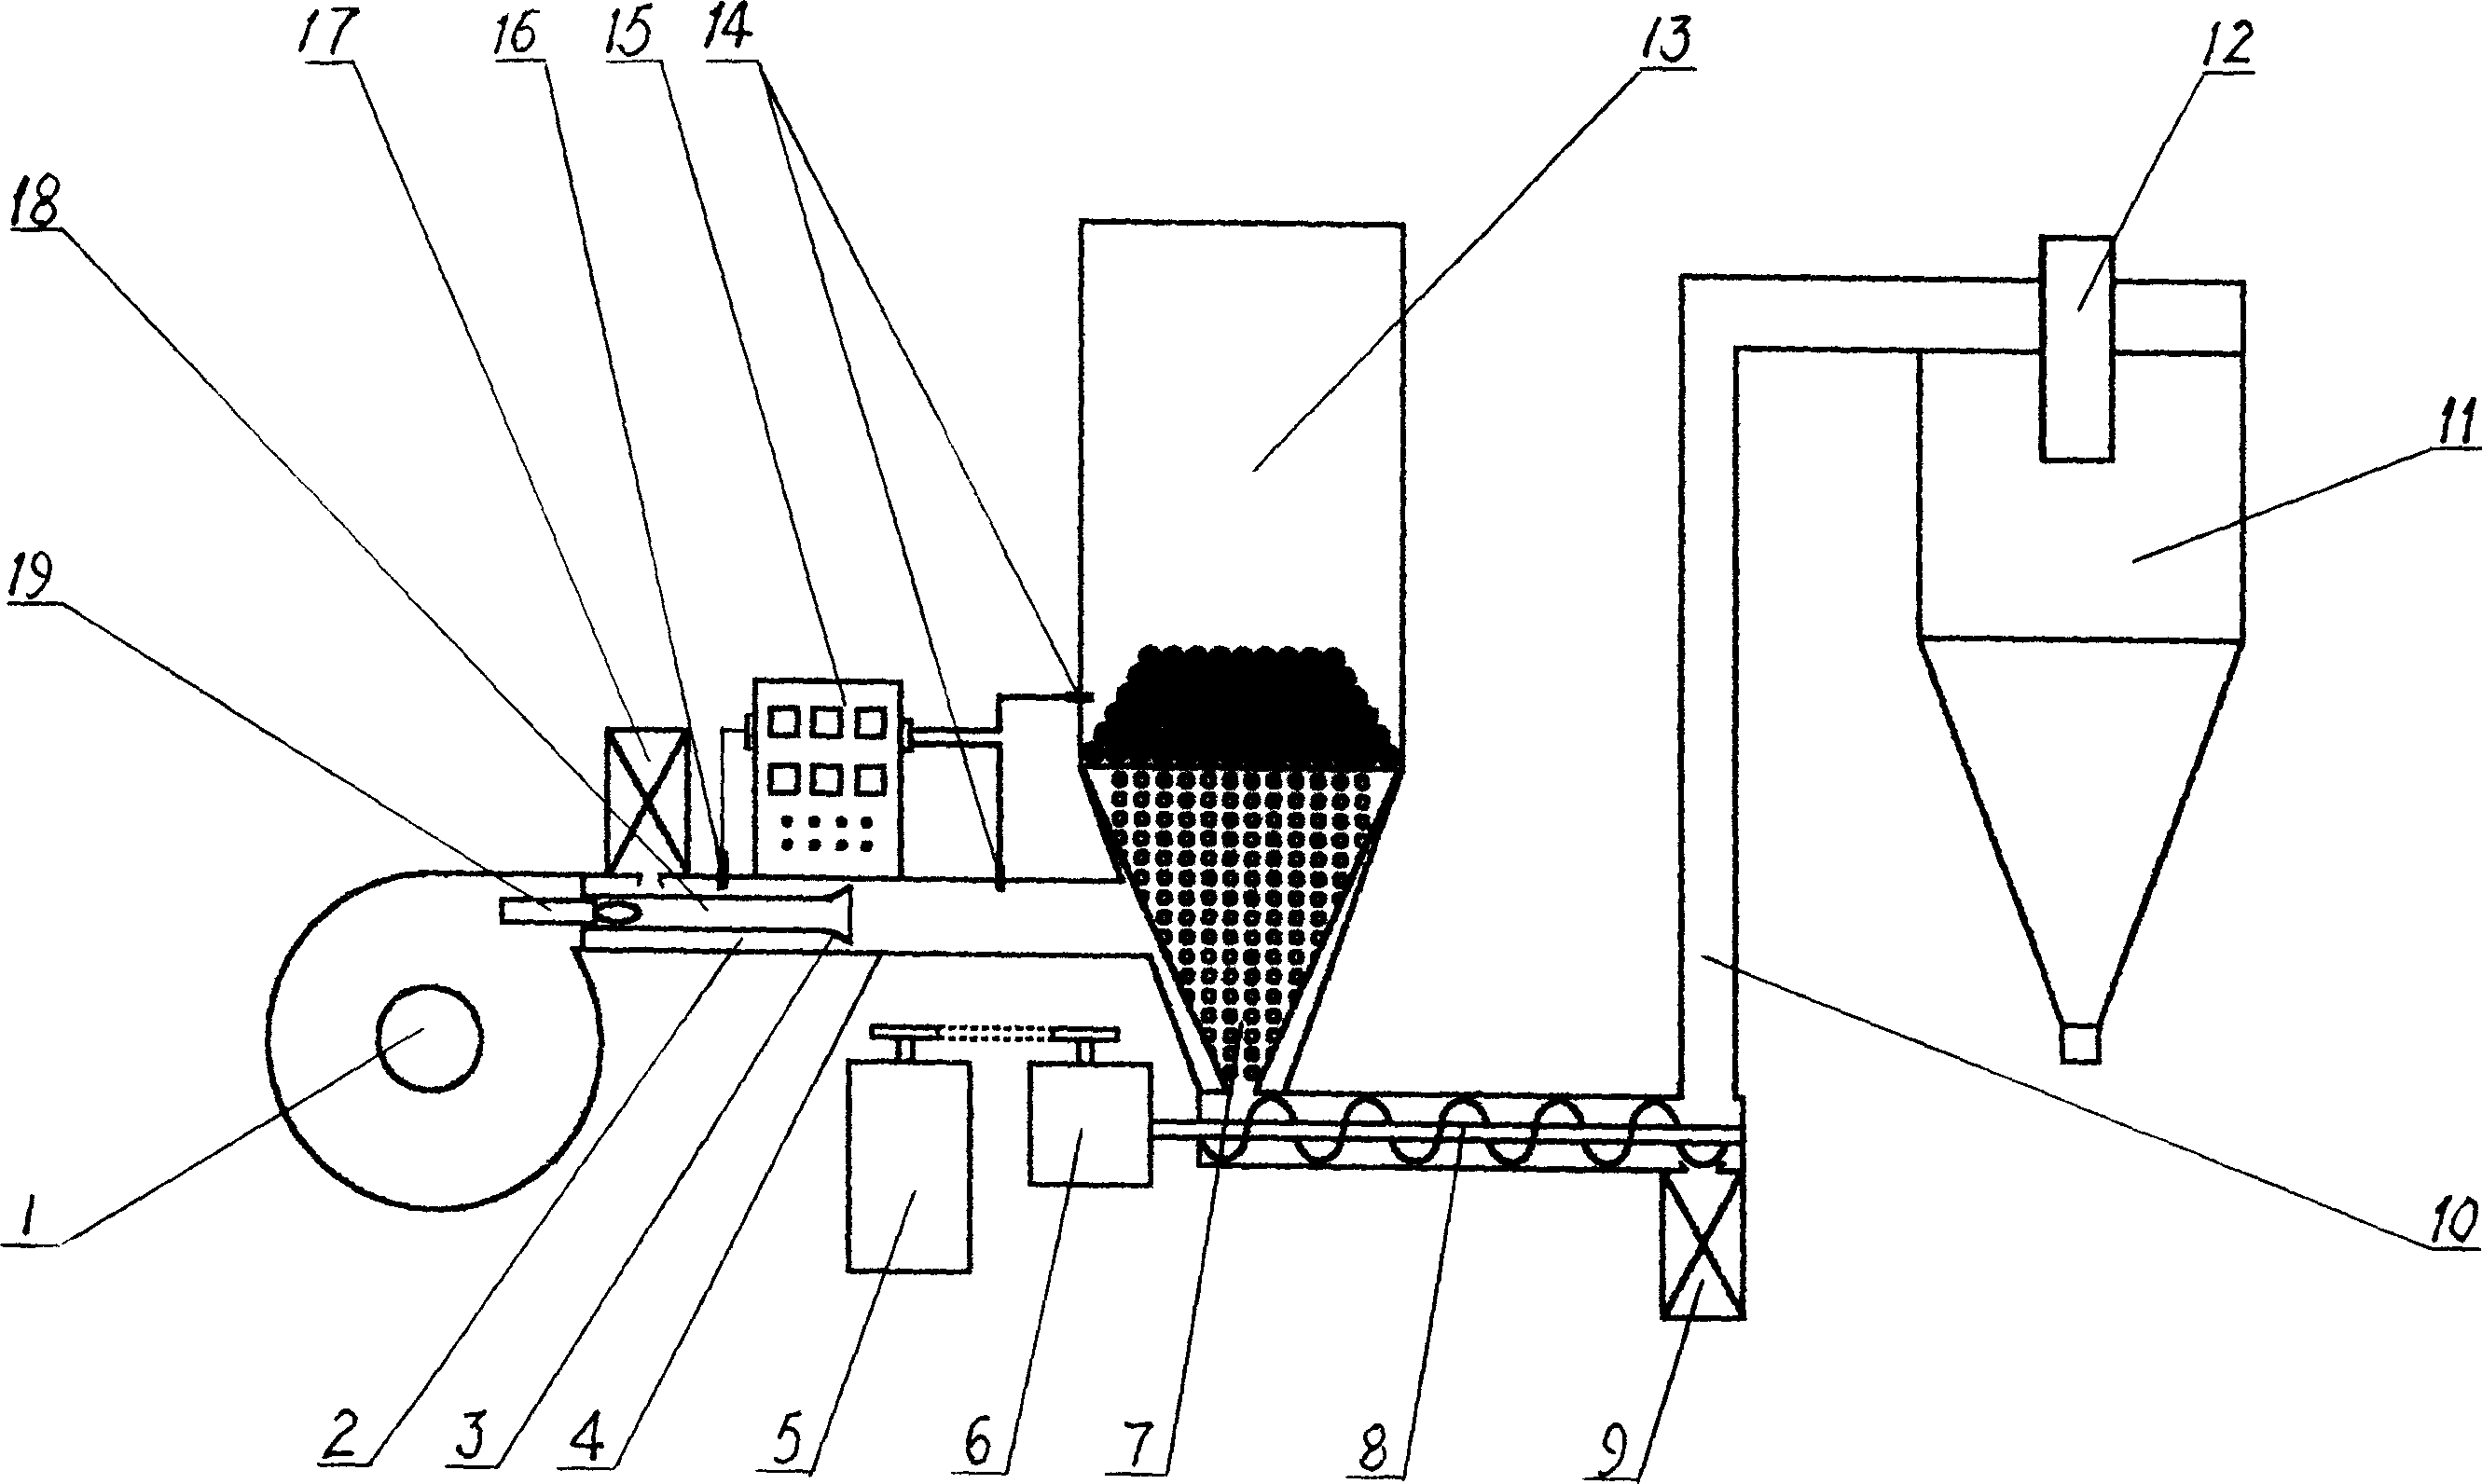 Drying device using gas as heating source